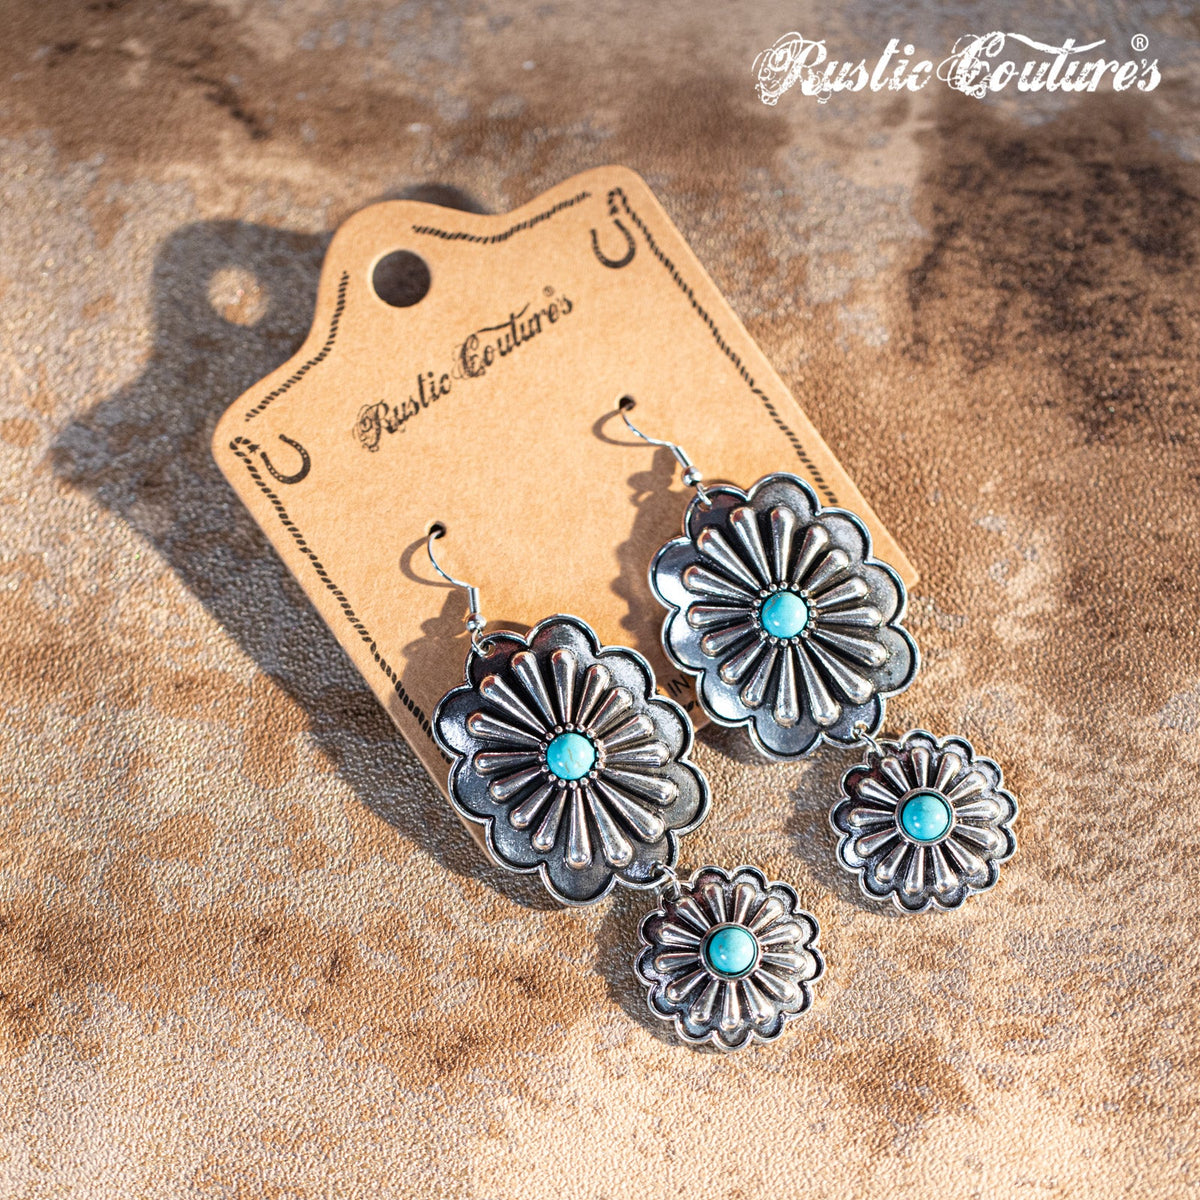 Rustic Couture's Navajo Silver Concho with Natural Stone Dangling Earring - Montana West World